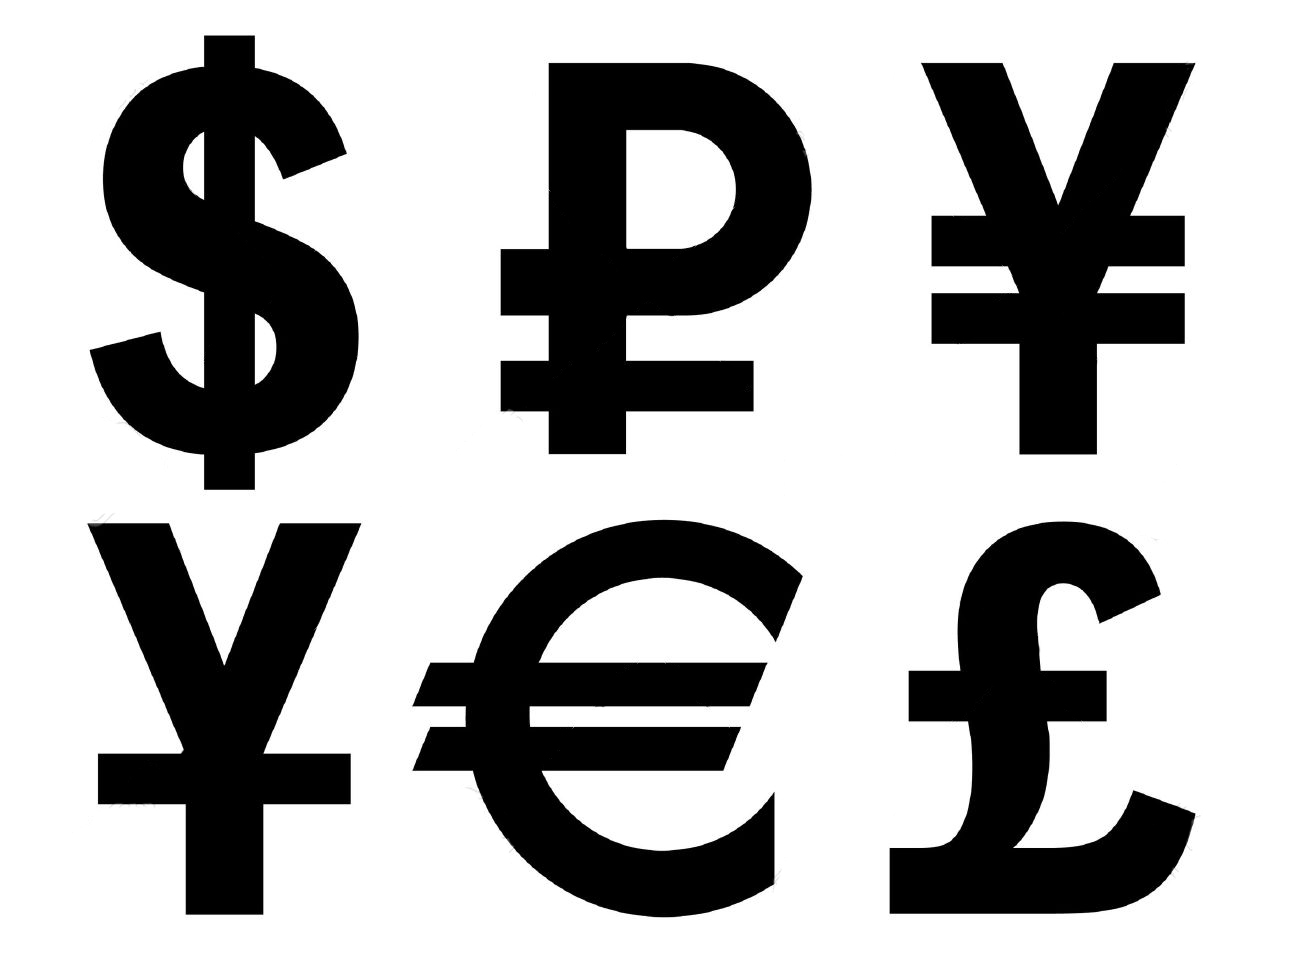 symbol of money currency